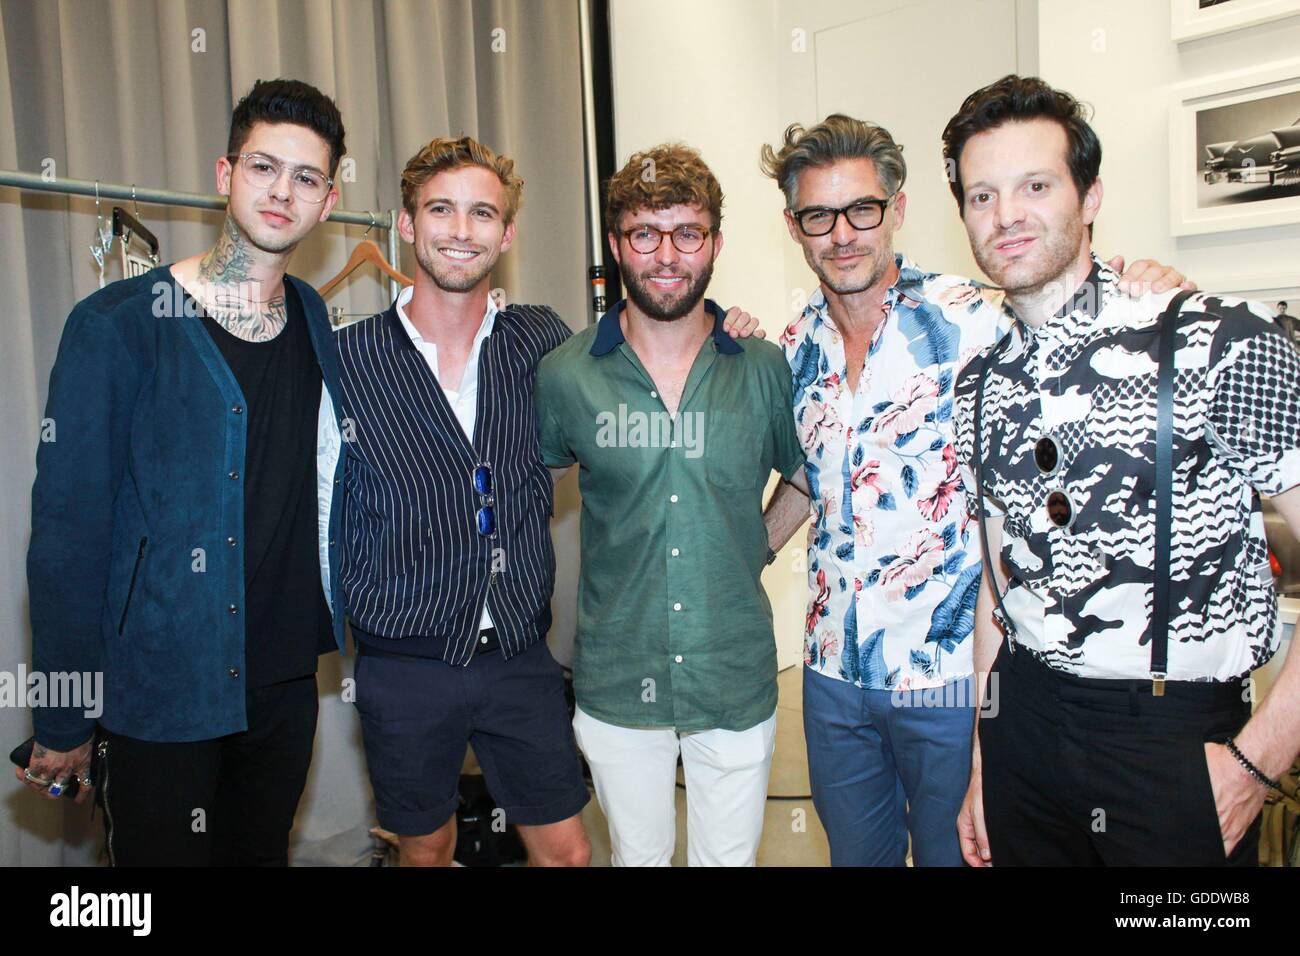 New York, NY, USA. 14th July, 2016. Travis Mills, RJ King, Timo Weiland, Eric Rutherford, Mayer Hawthorne in attendance for Timo Weiland Men's Runway Show - Spring/Summer 2017, Cadillac House, New York, NY July 14, 2016. © Achim Harding/Everett Collection/Alamy Live News Stock Photo